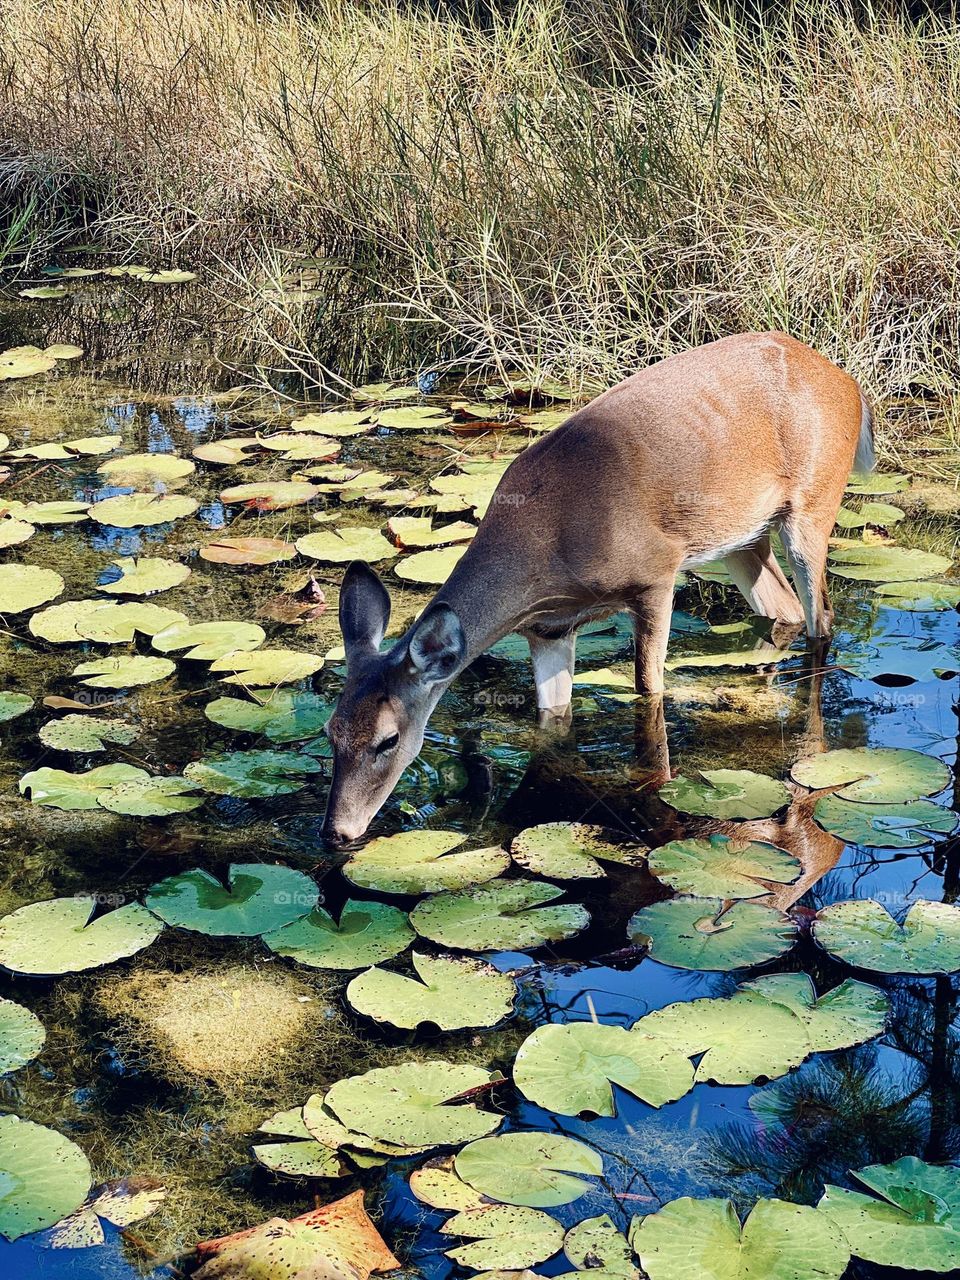 Young female deer leaning down to drink from a pond. She’s standing in the water amid lily pads, in dappled sunlight and shade. Beauty in wildlife, close up.